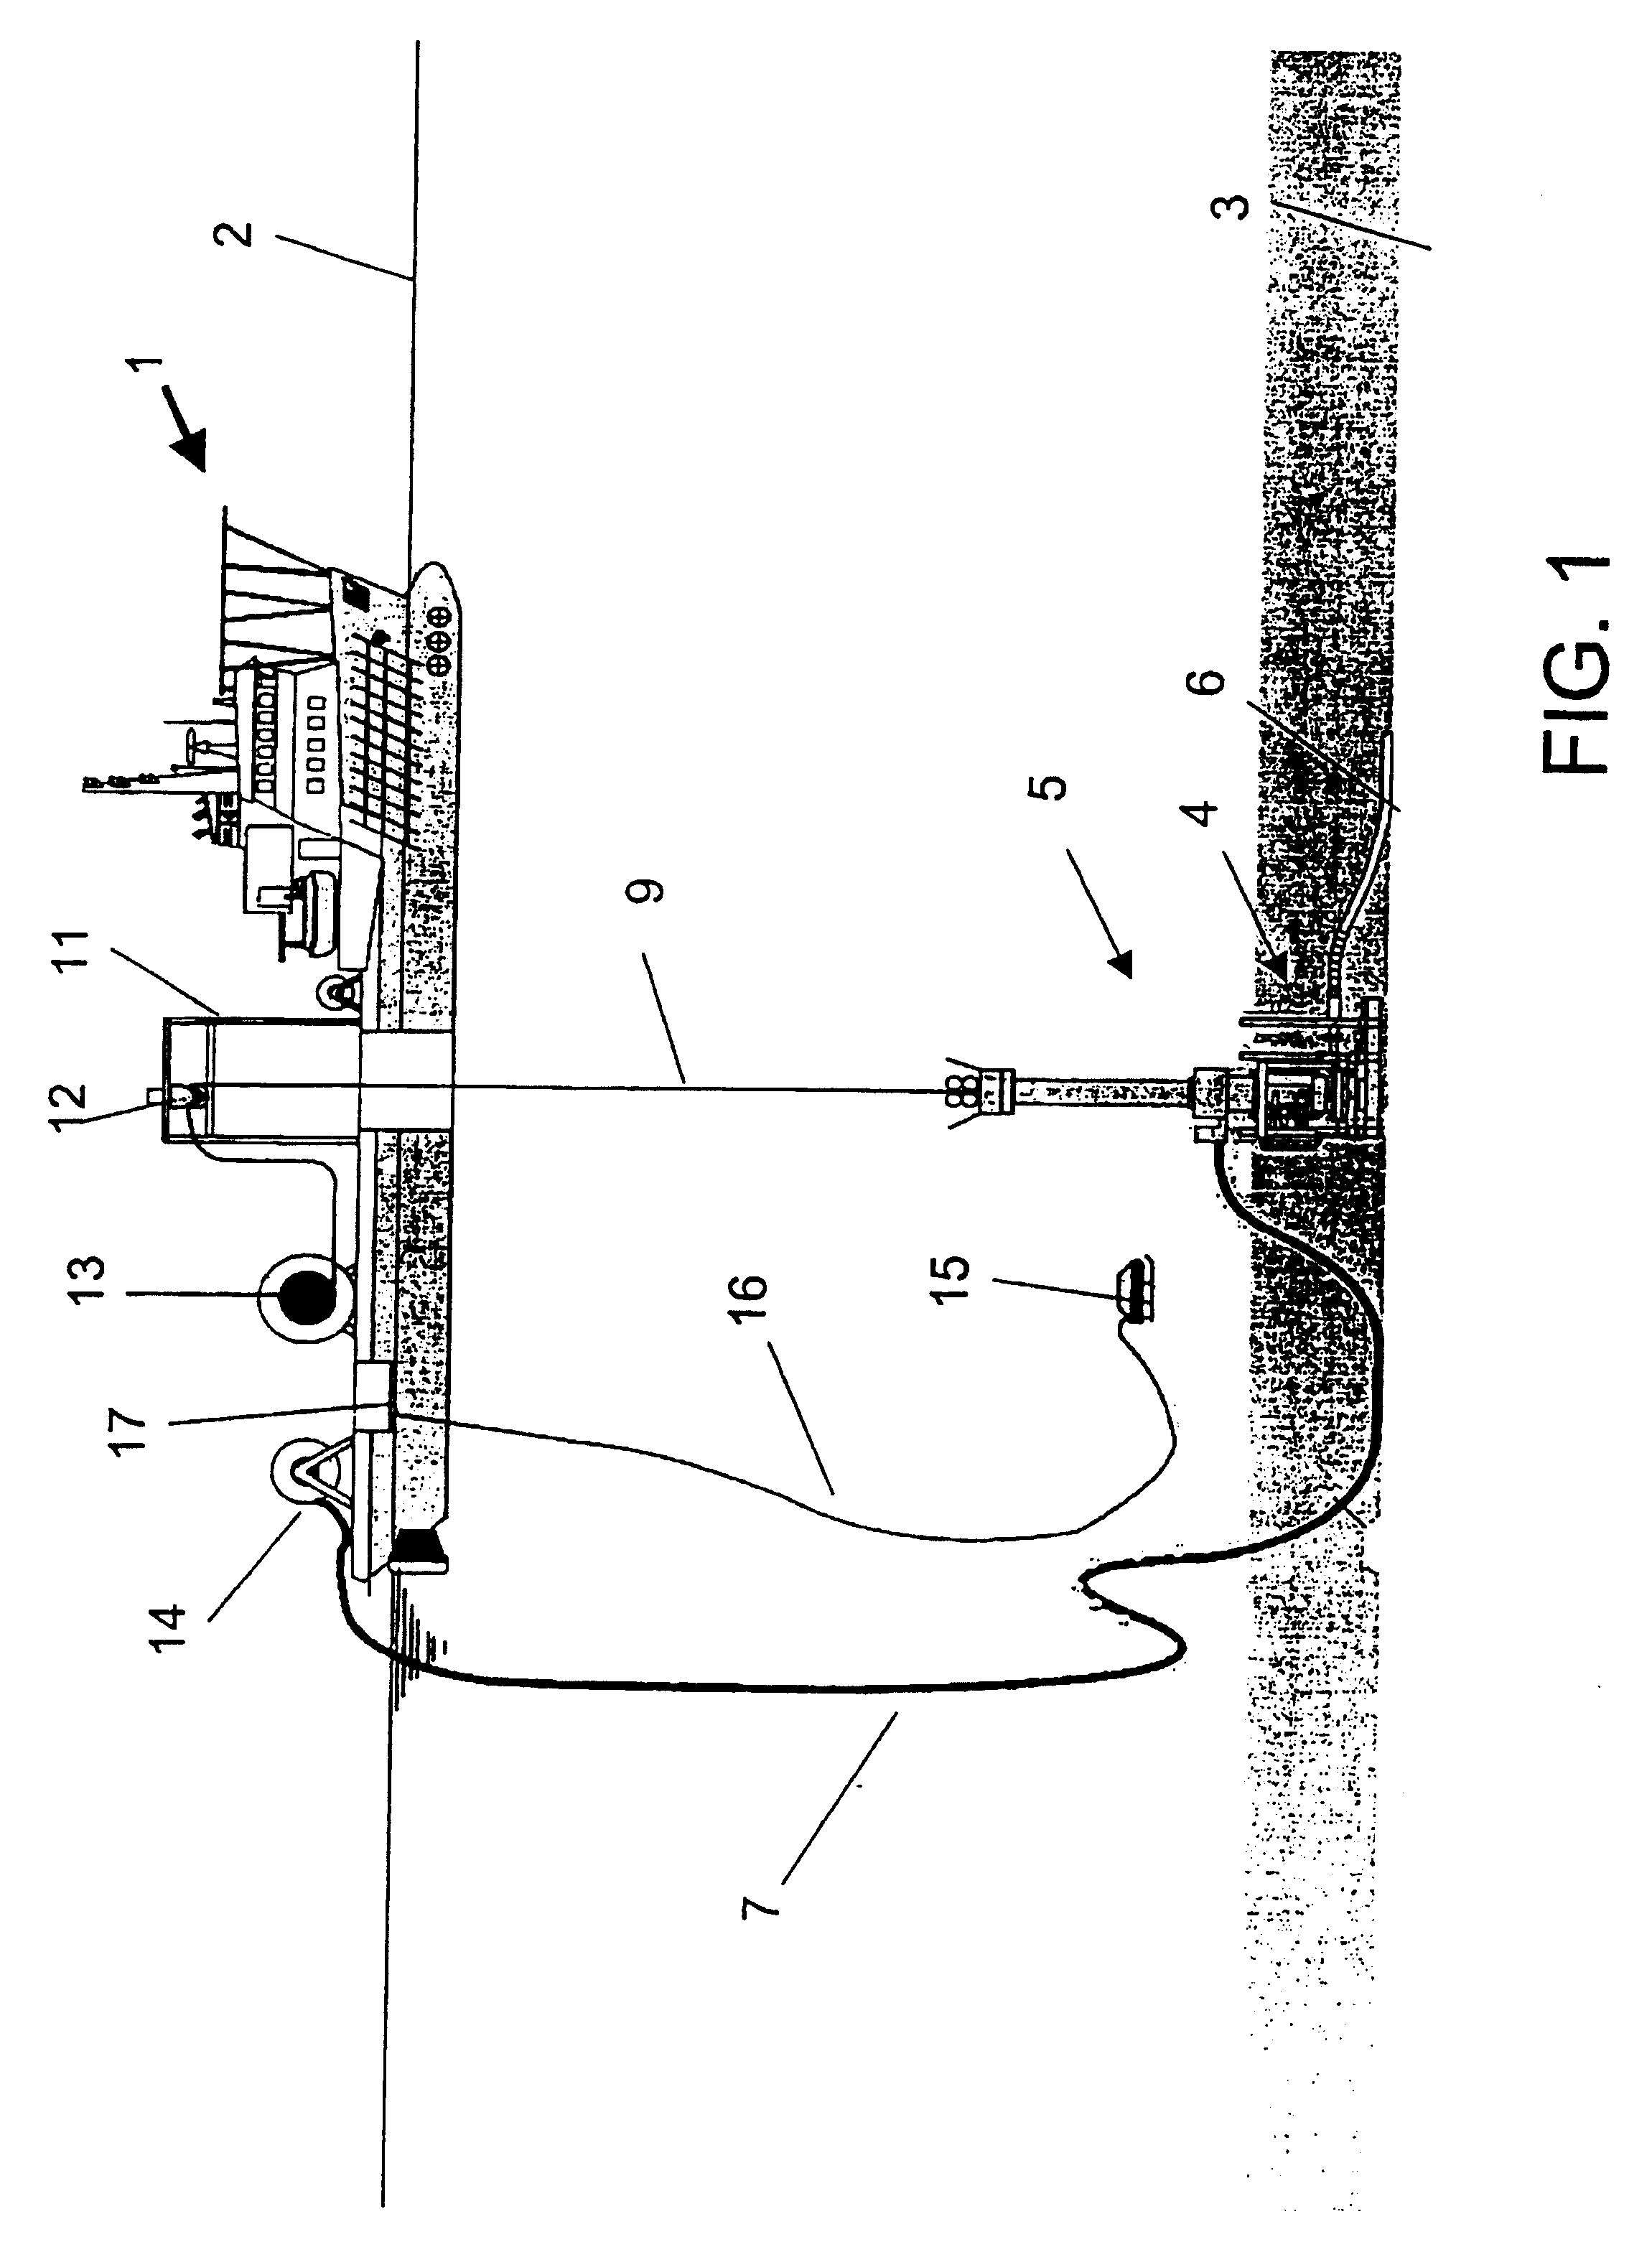 Intervention device for a subsea well, and method and cable for use with the device